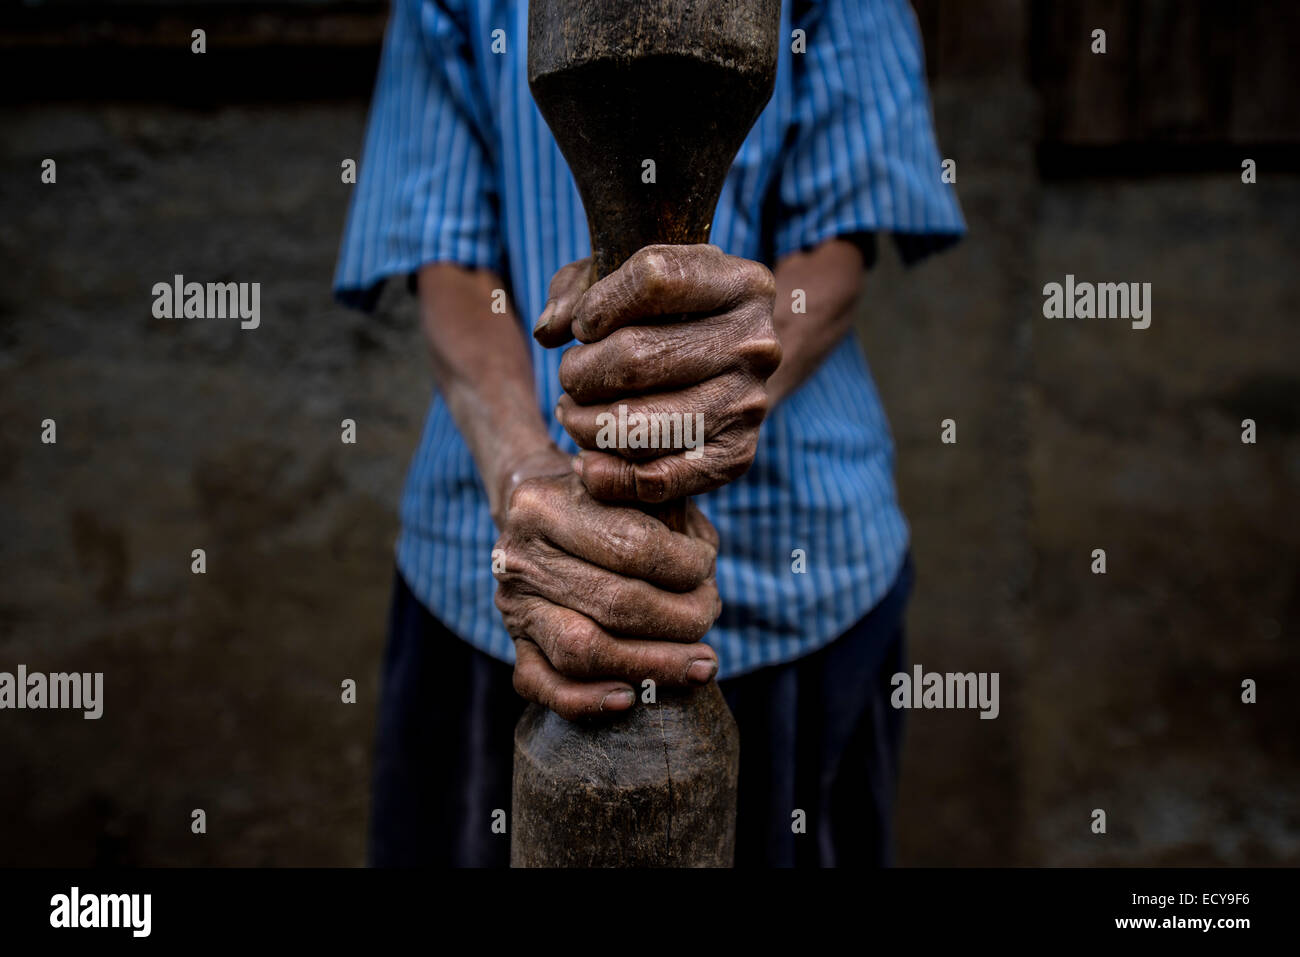 Woman holding bar for rice pounding, North Luzon, Philippines Stock Photo